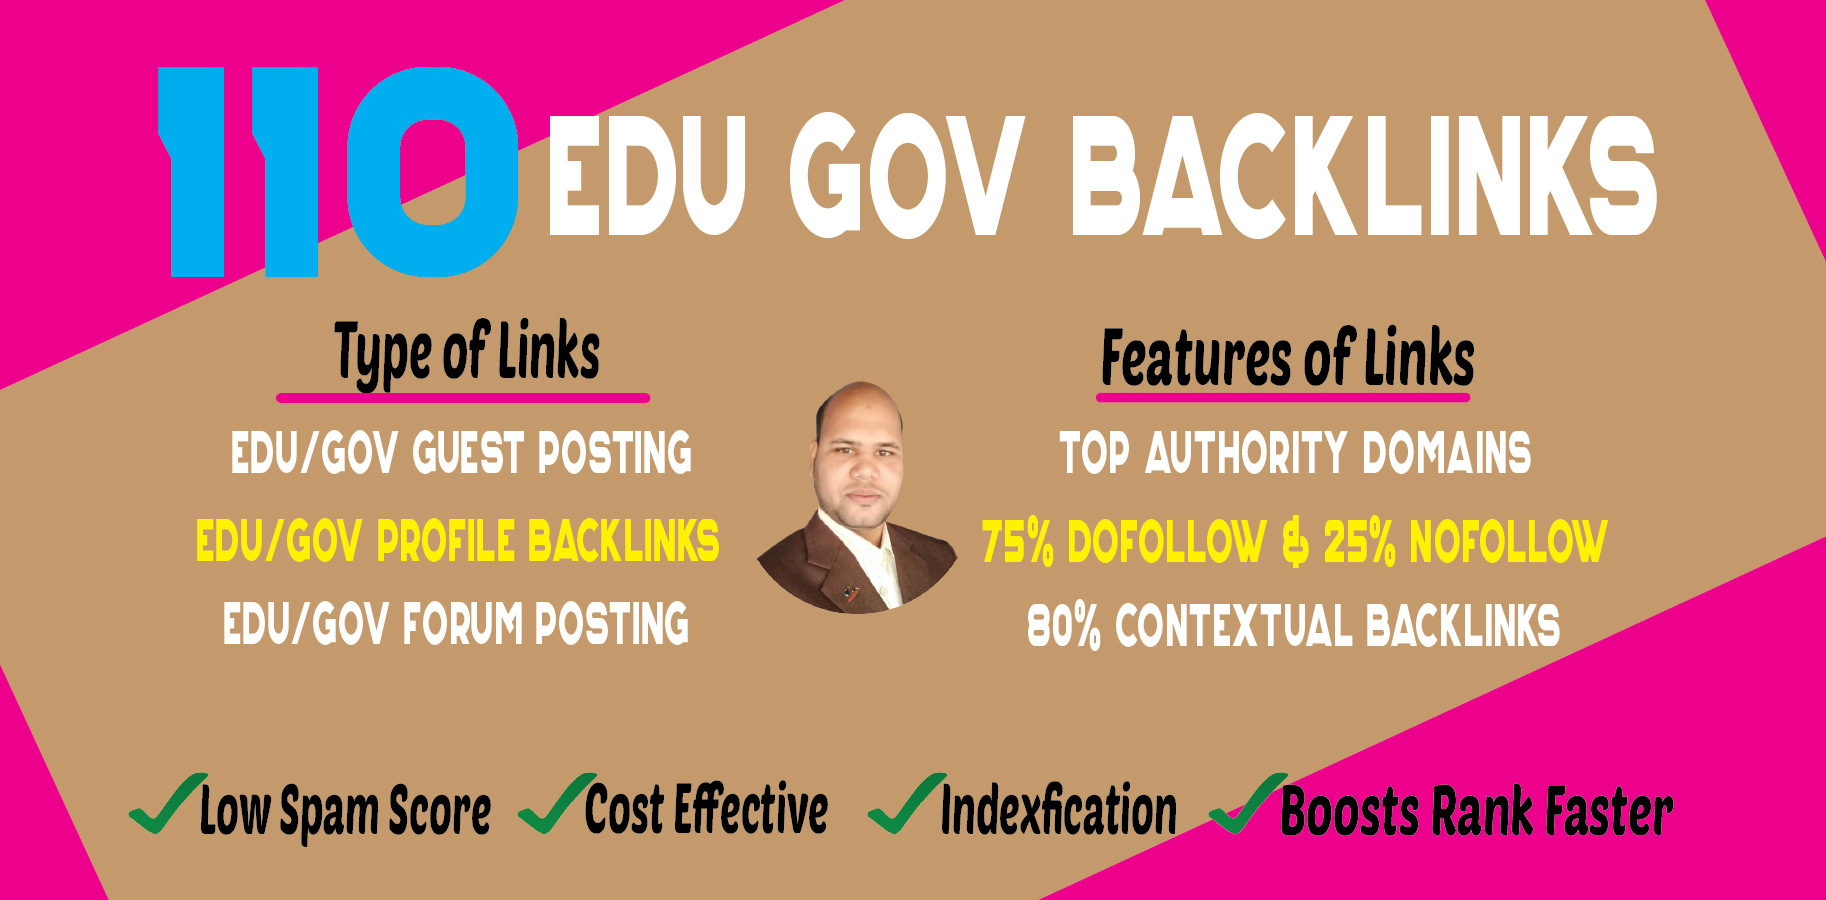 110 EDU GOV Backlinks Manually Created From TOP Authority Domains